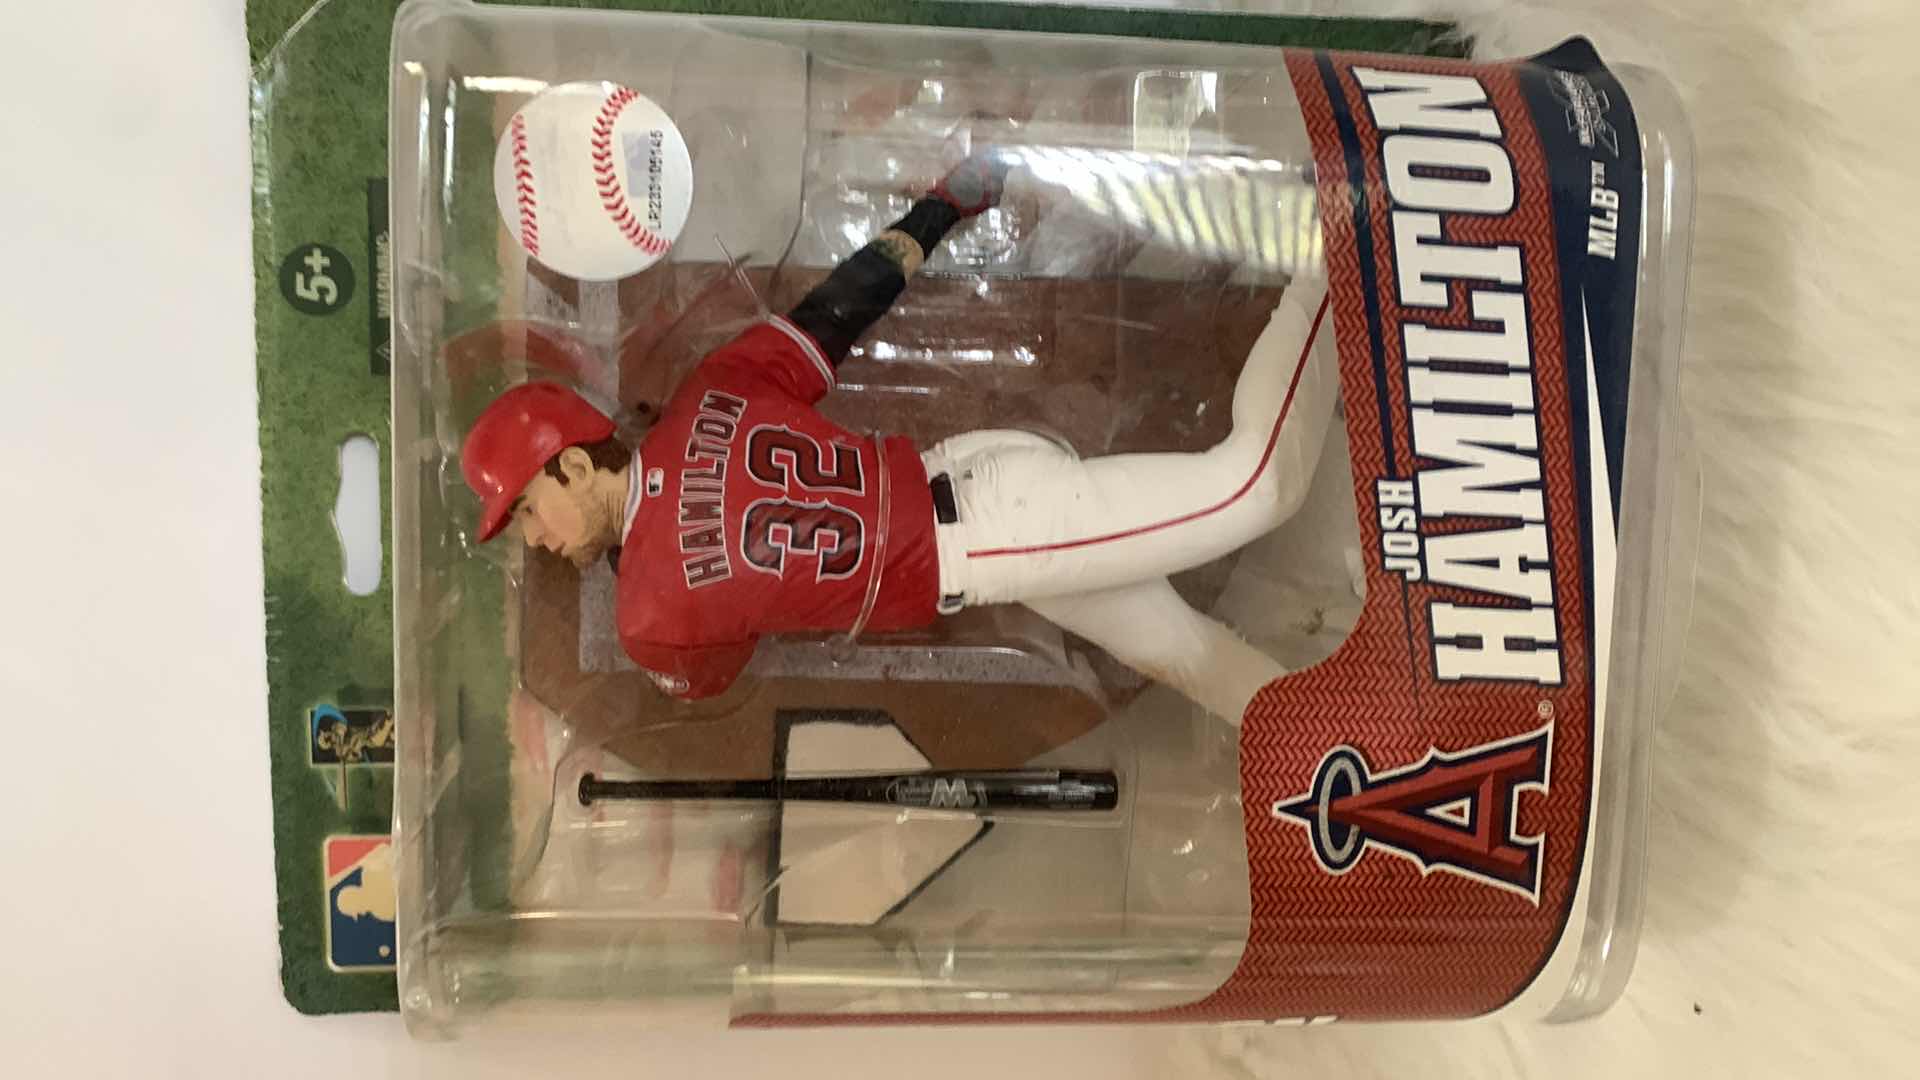 Photo 2 of ANGELS BASEBALL JERSEY SIZE XL AND NEW JOSH HAMILTON COLLECTIBLE FIGURINE